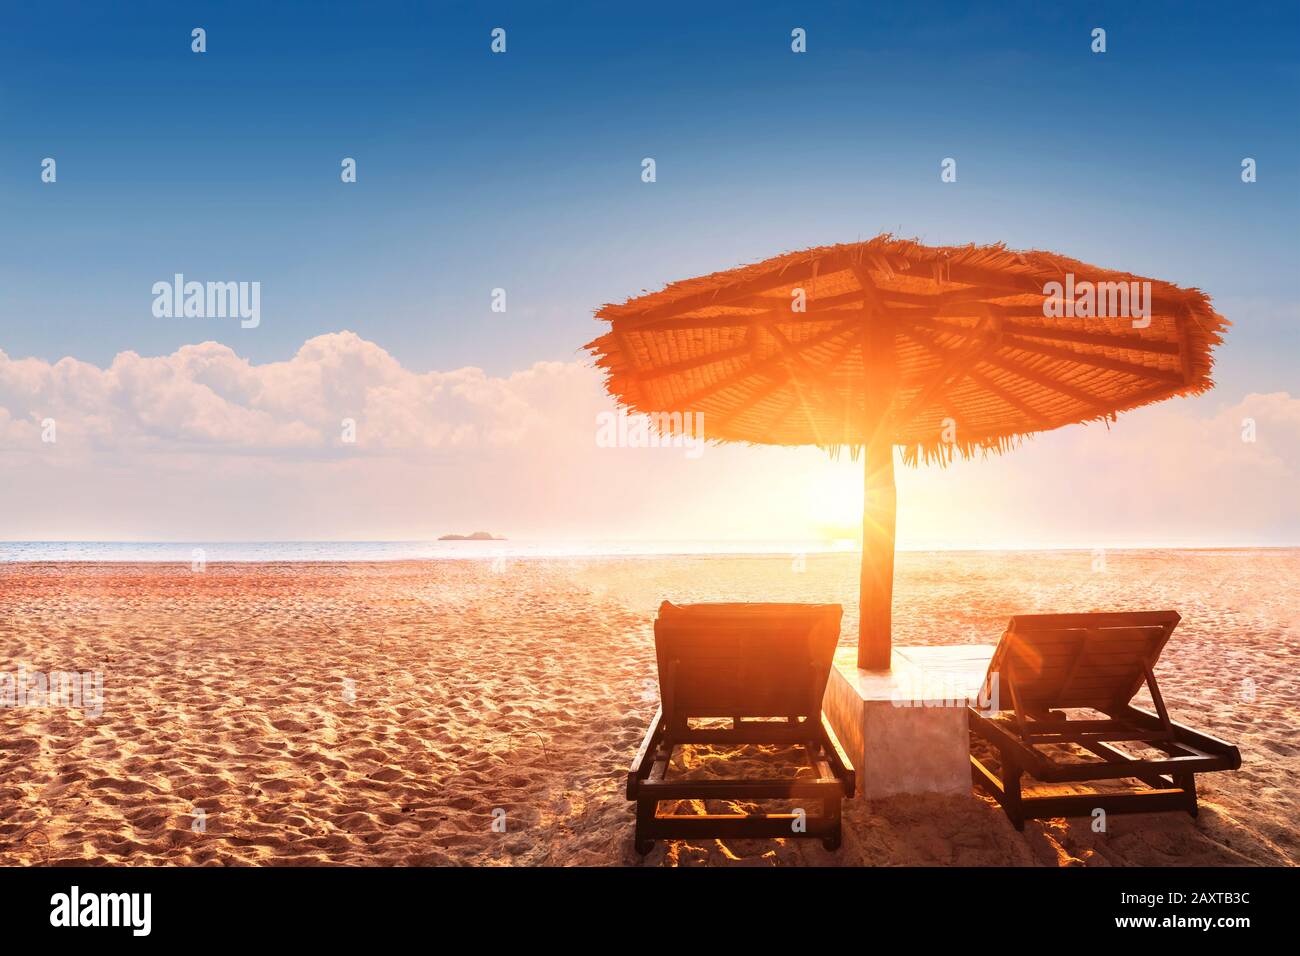 Parasol and sun bed loungers on empty tropical beach at sunset with beautiful warm colors, summer vacation holiday destination hotel resort landscape Stock Photo